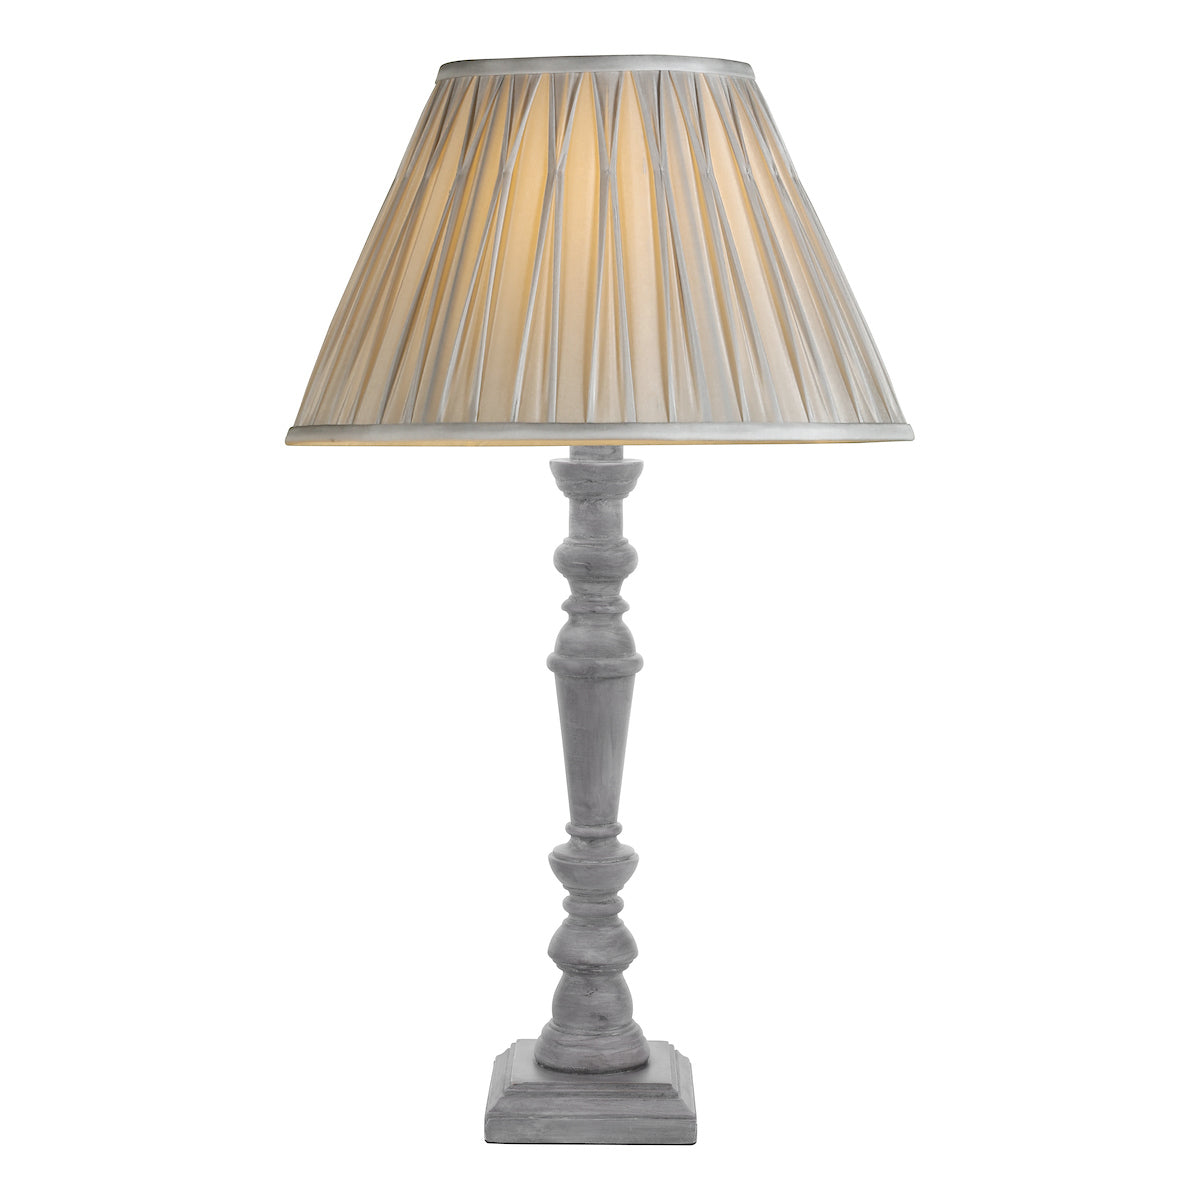 Laura Ashley Tate Table Lamp Distressed Grey and Polished Chrome Base Only